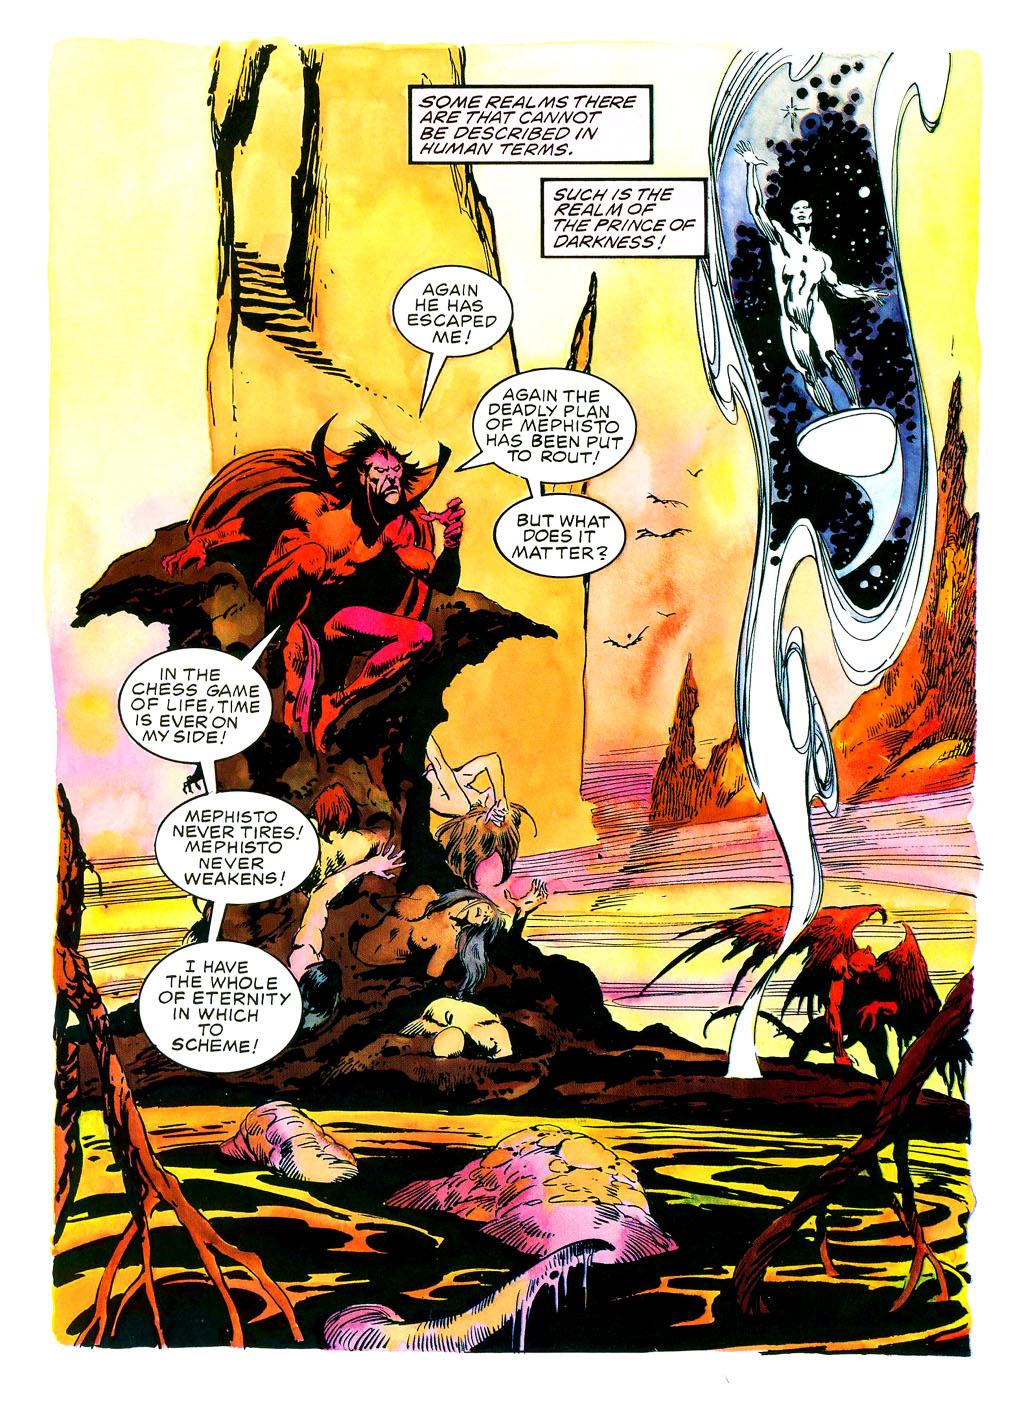 Silver Surfer Judgment Day review